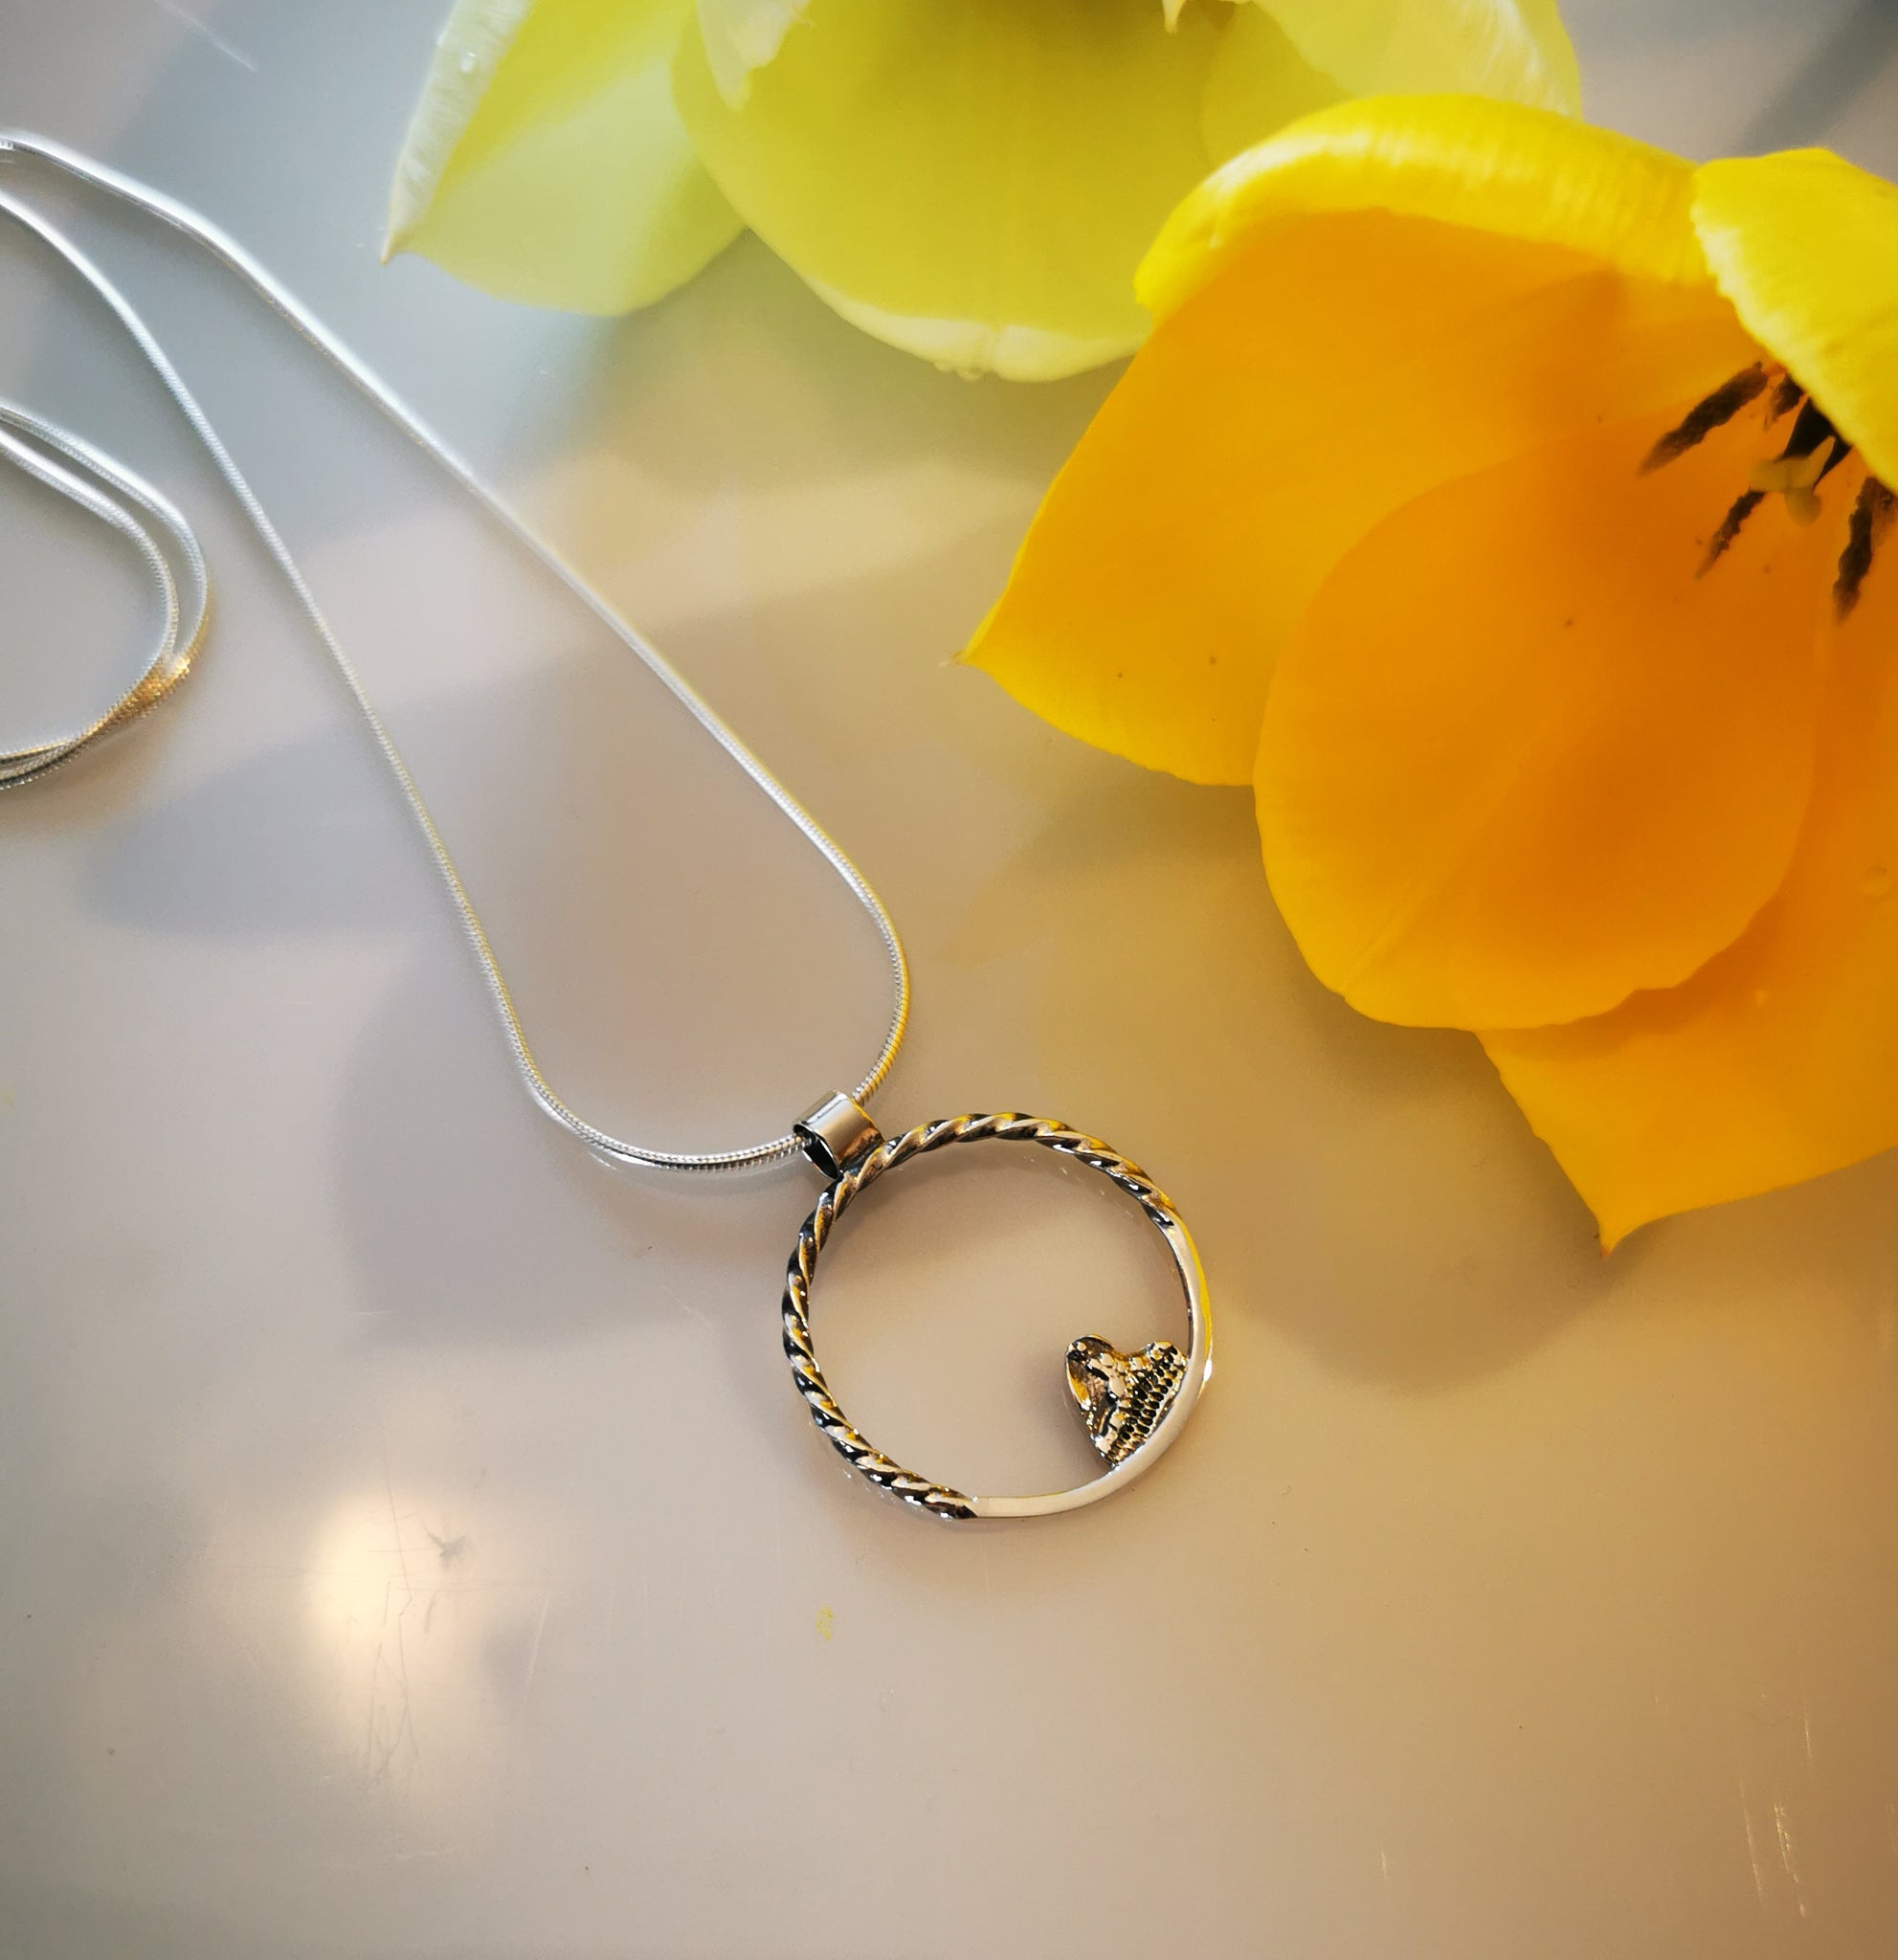 MEDIUM MOON HEART, original pearl and sterling silver pendant handcrafted in Canada